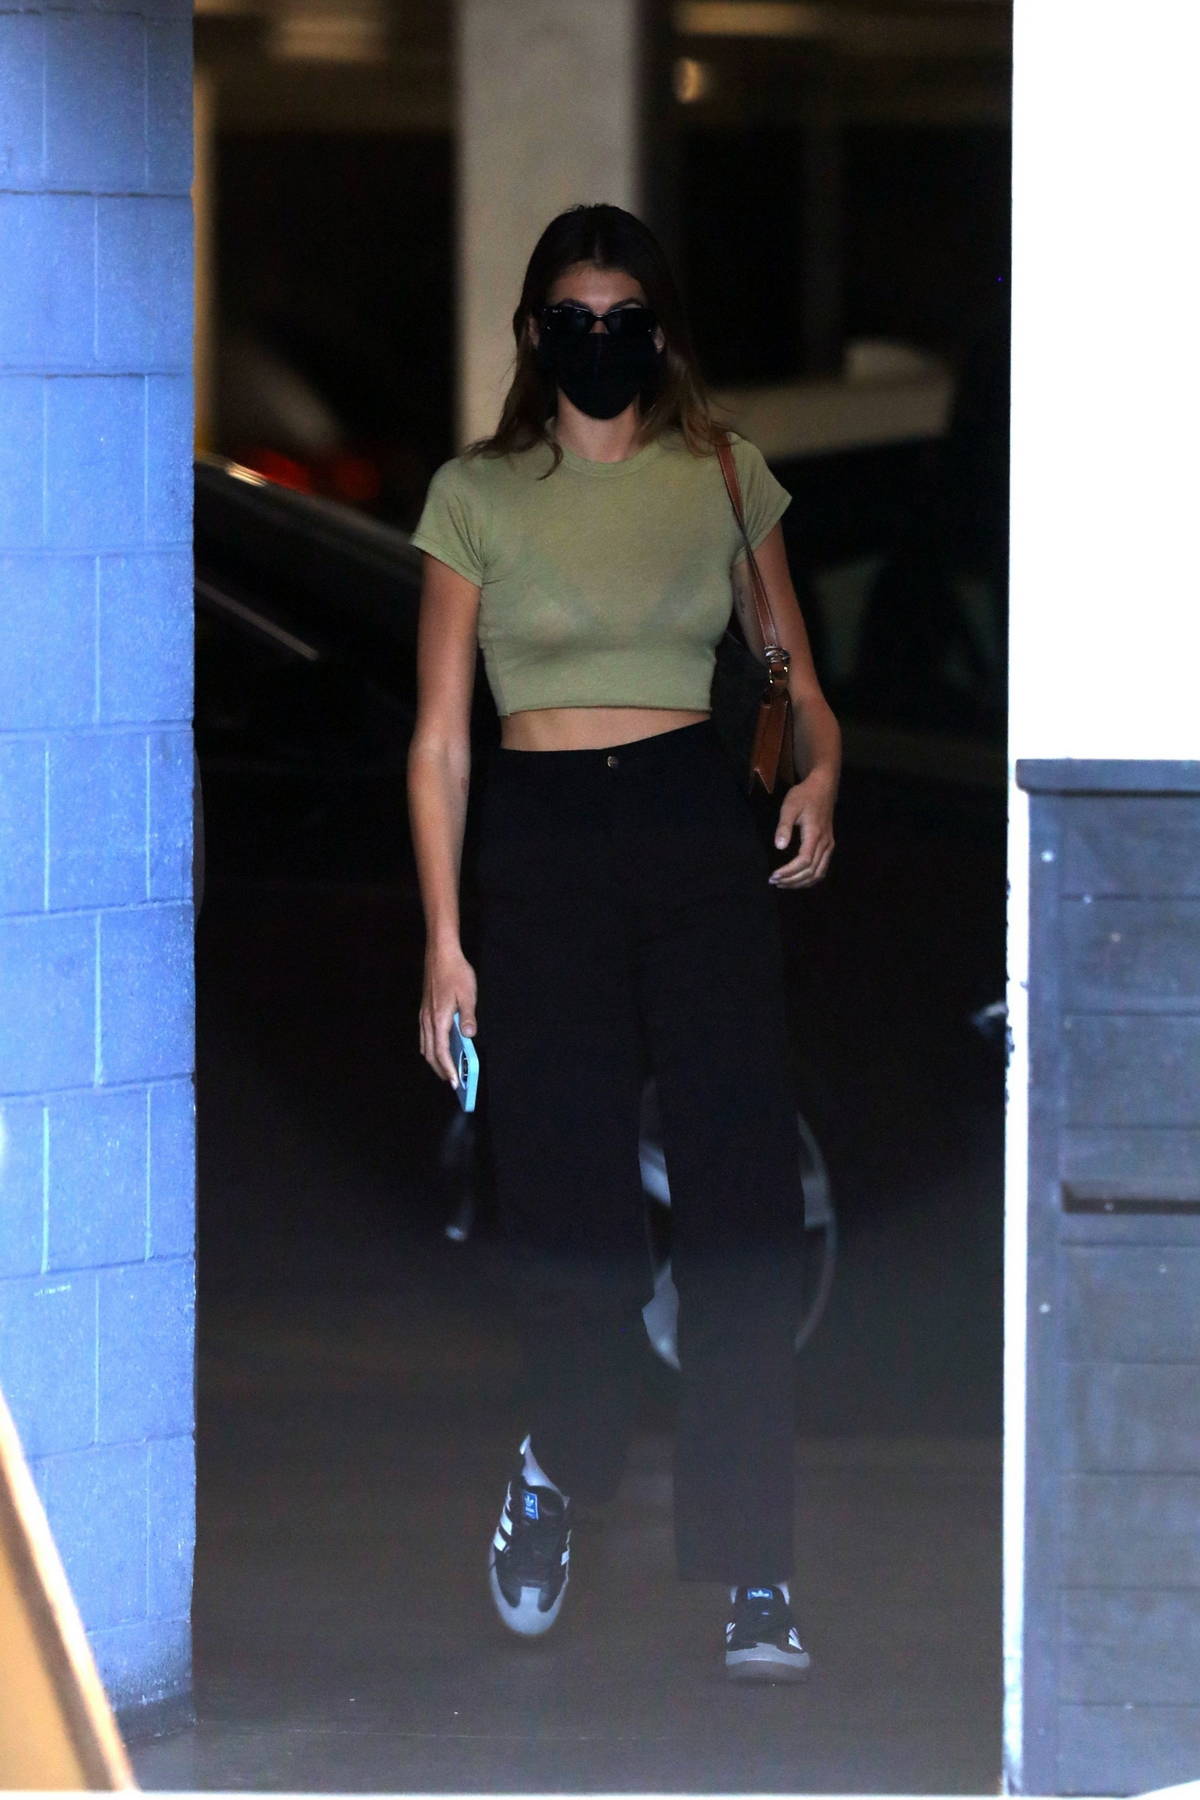 Ariel Winter sports hot pink leggings and a sheer top for a trip